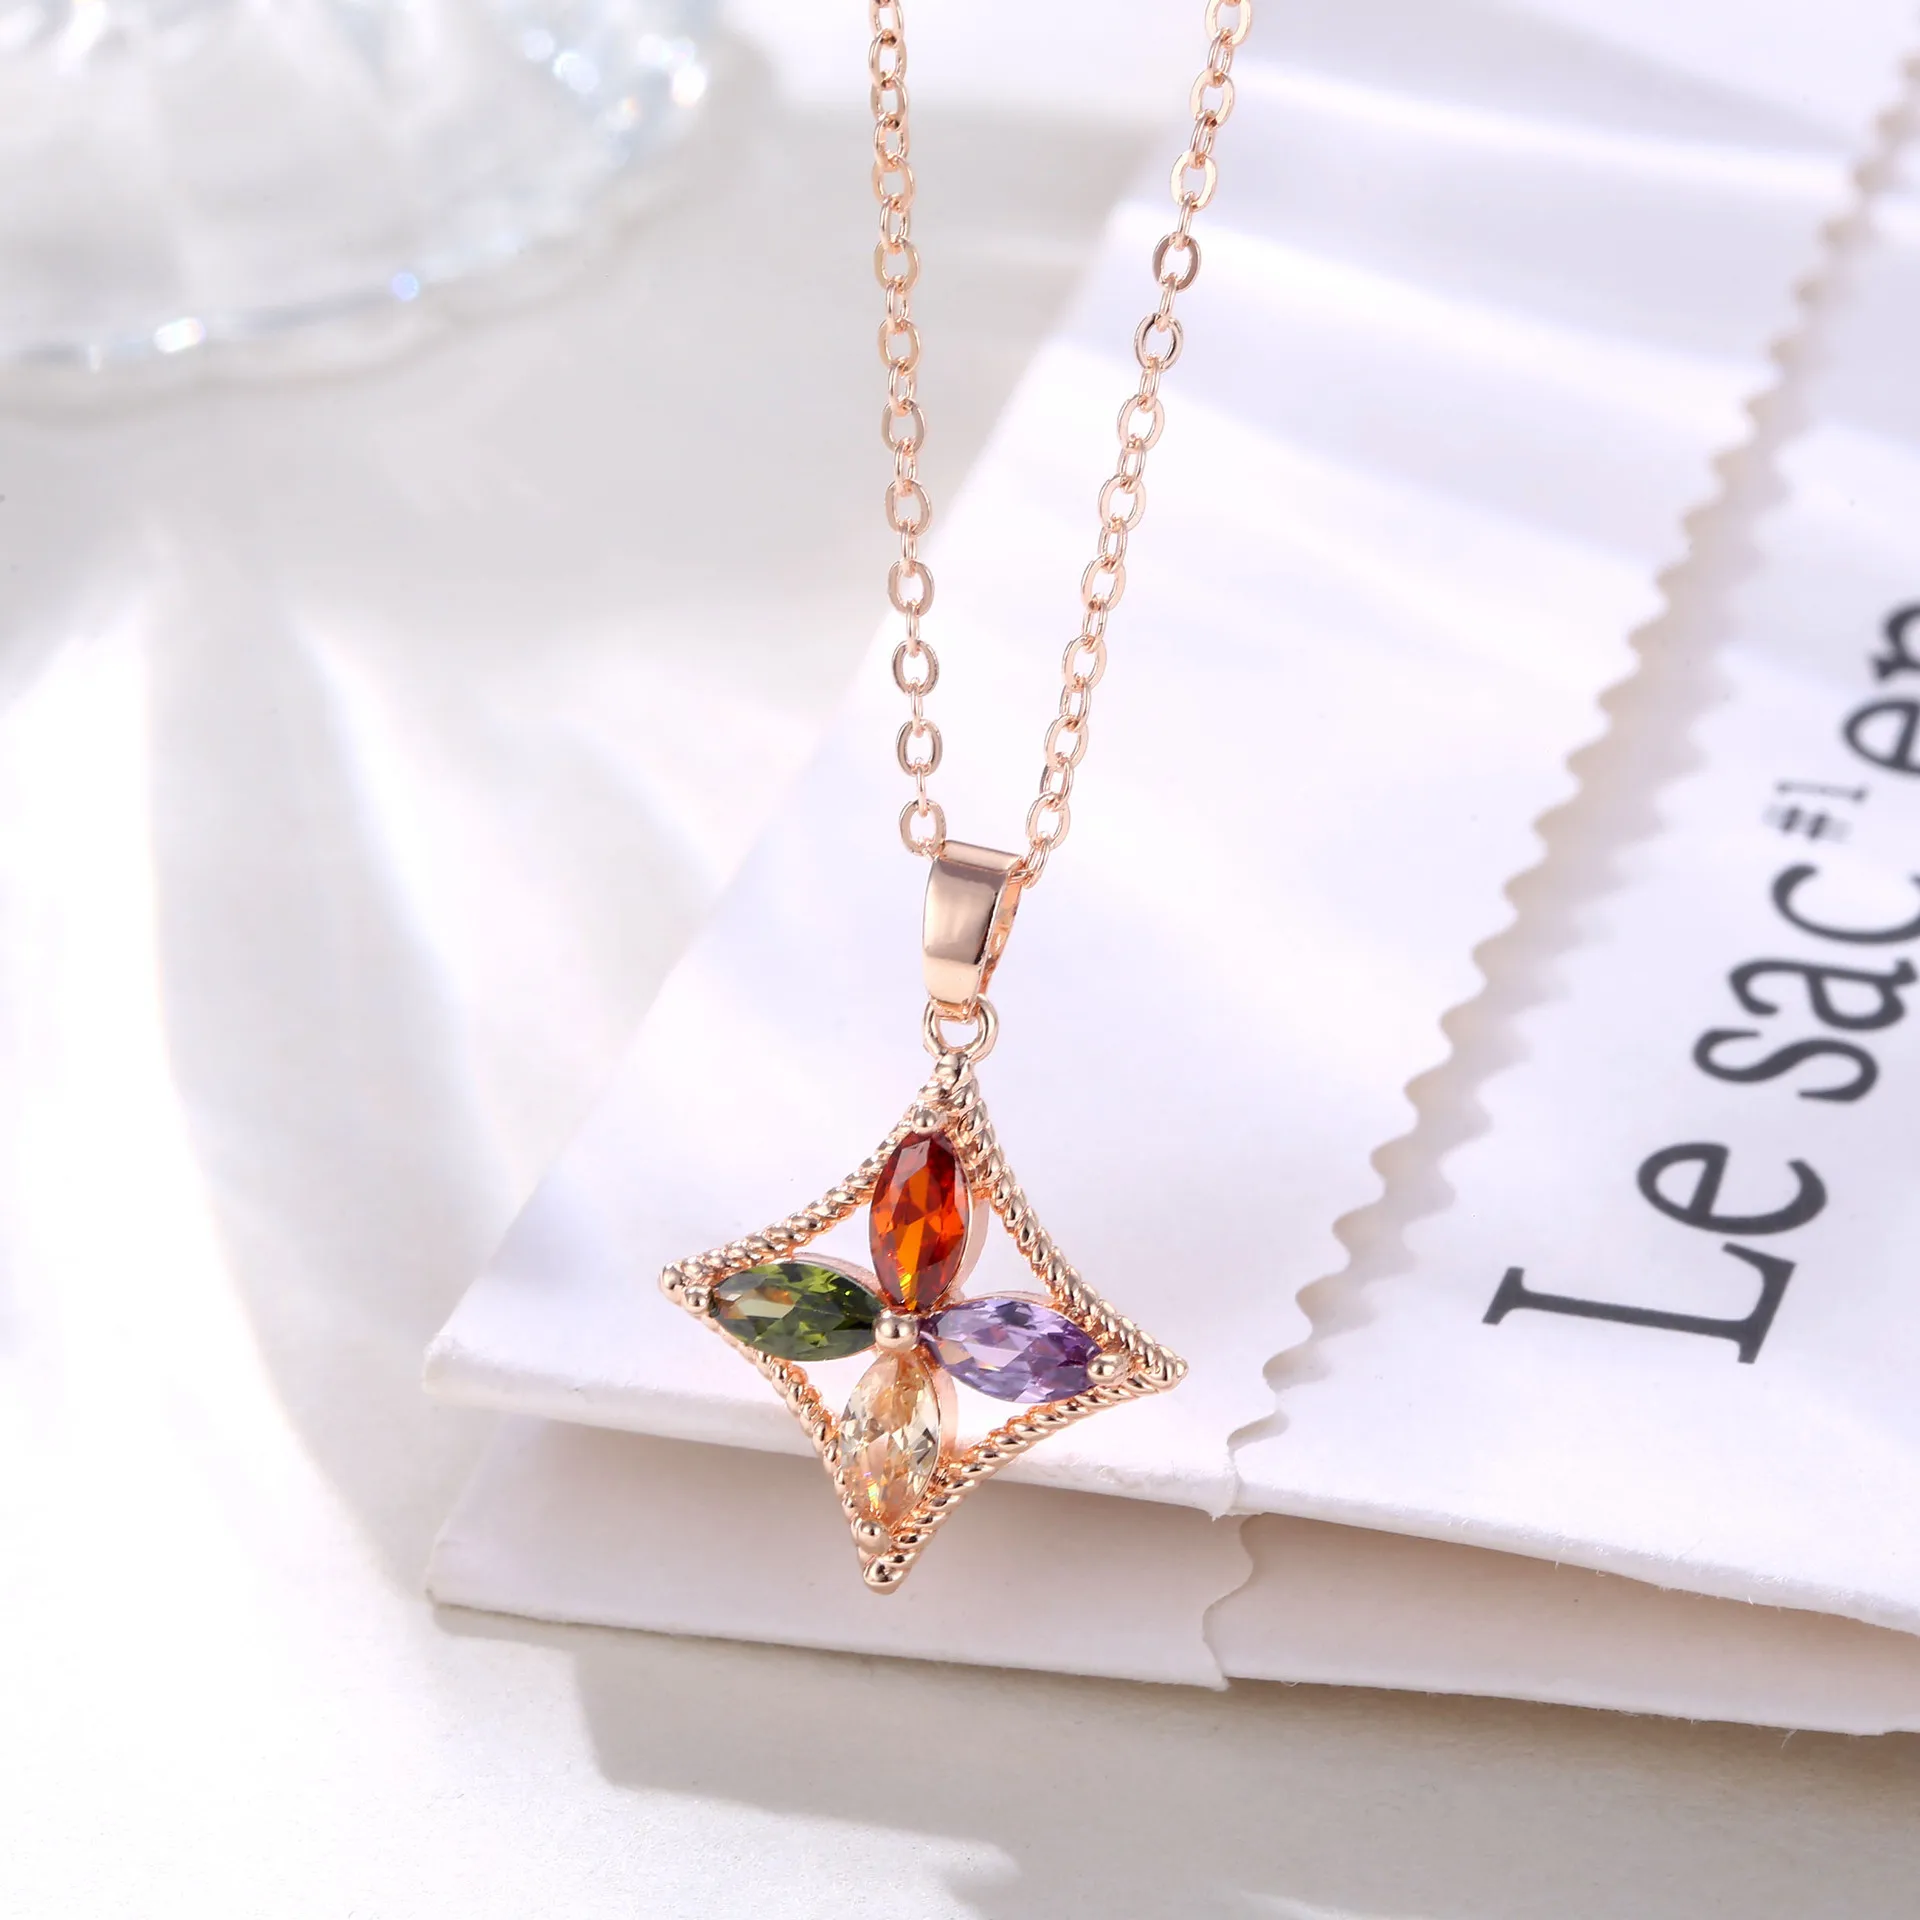 

Fashion Jewelry Mona Lisa 7 Color Zircon Rose Gold Rhombus Necklace Pendant for Women Girls Christmas Valentine's Day GIft